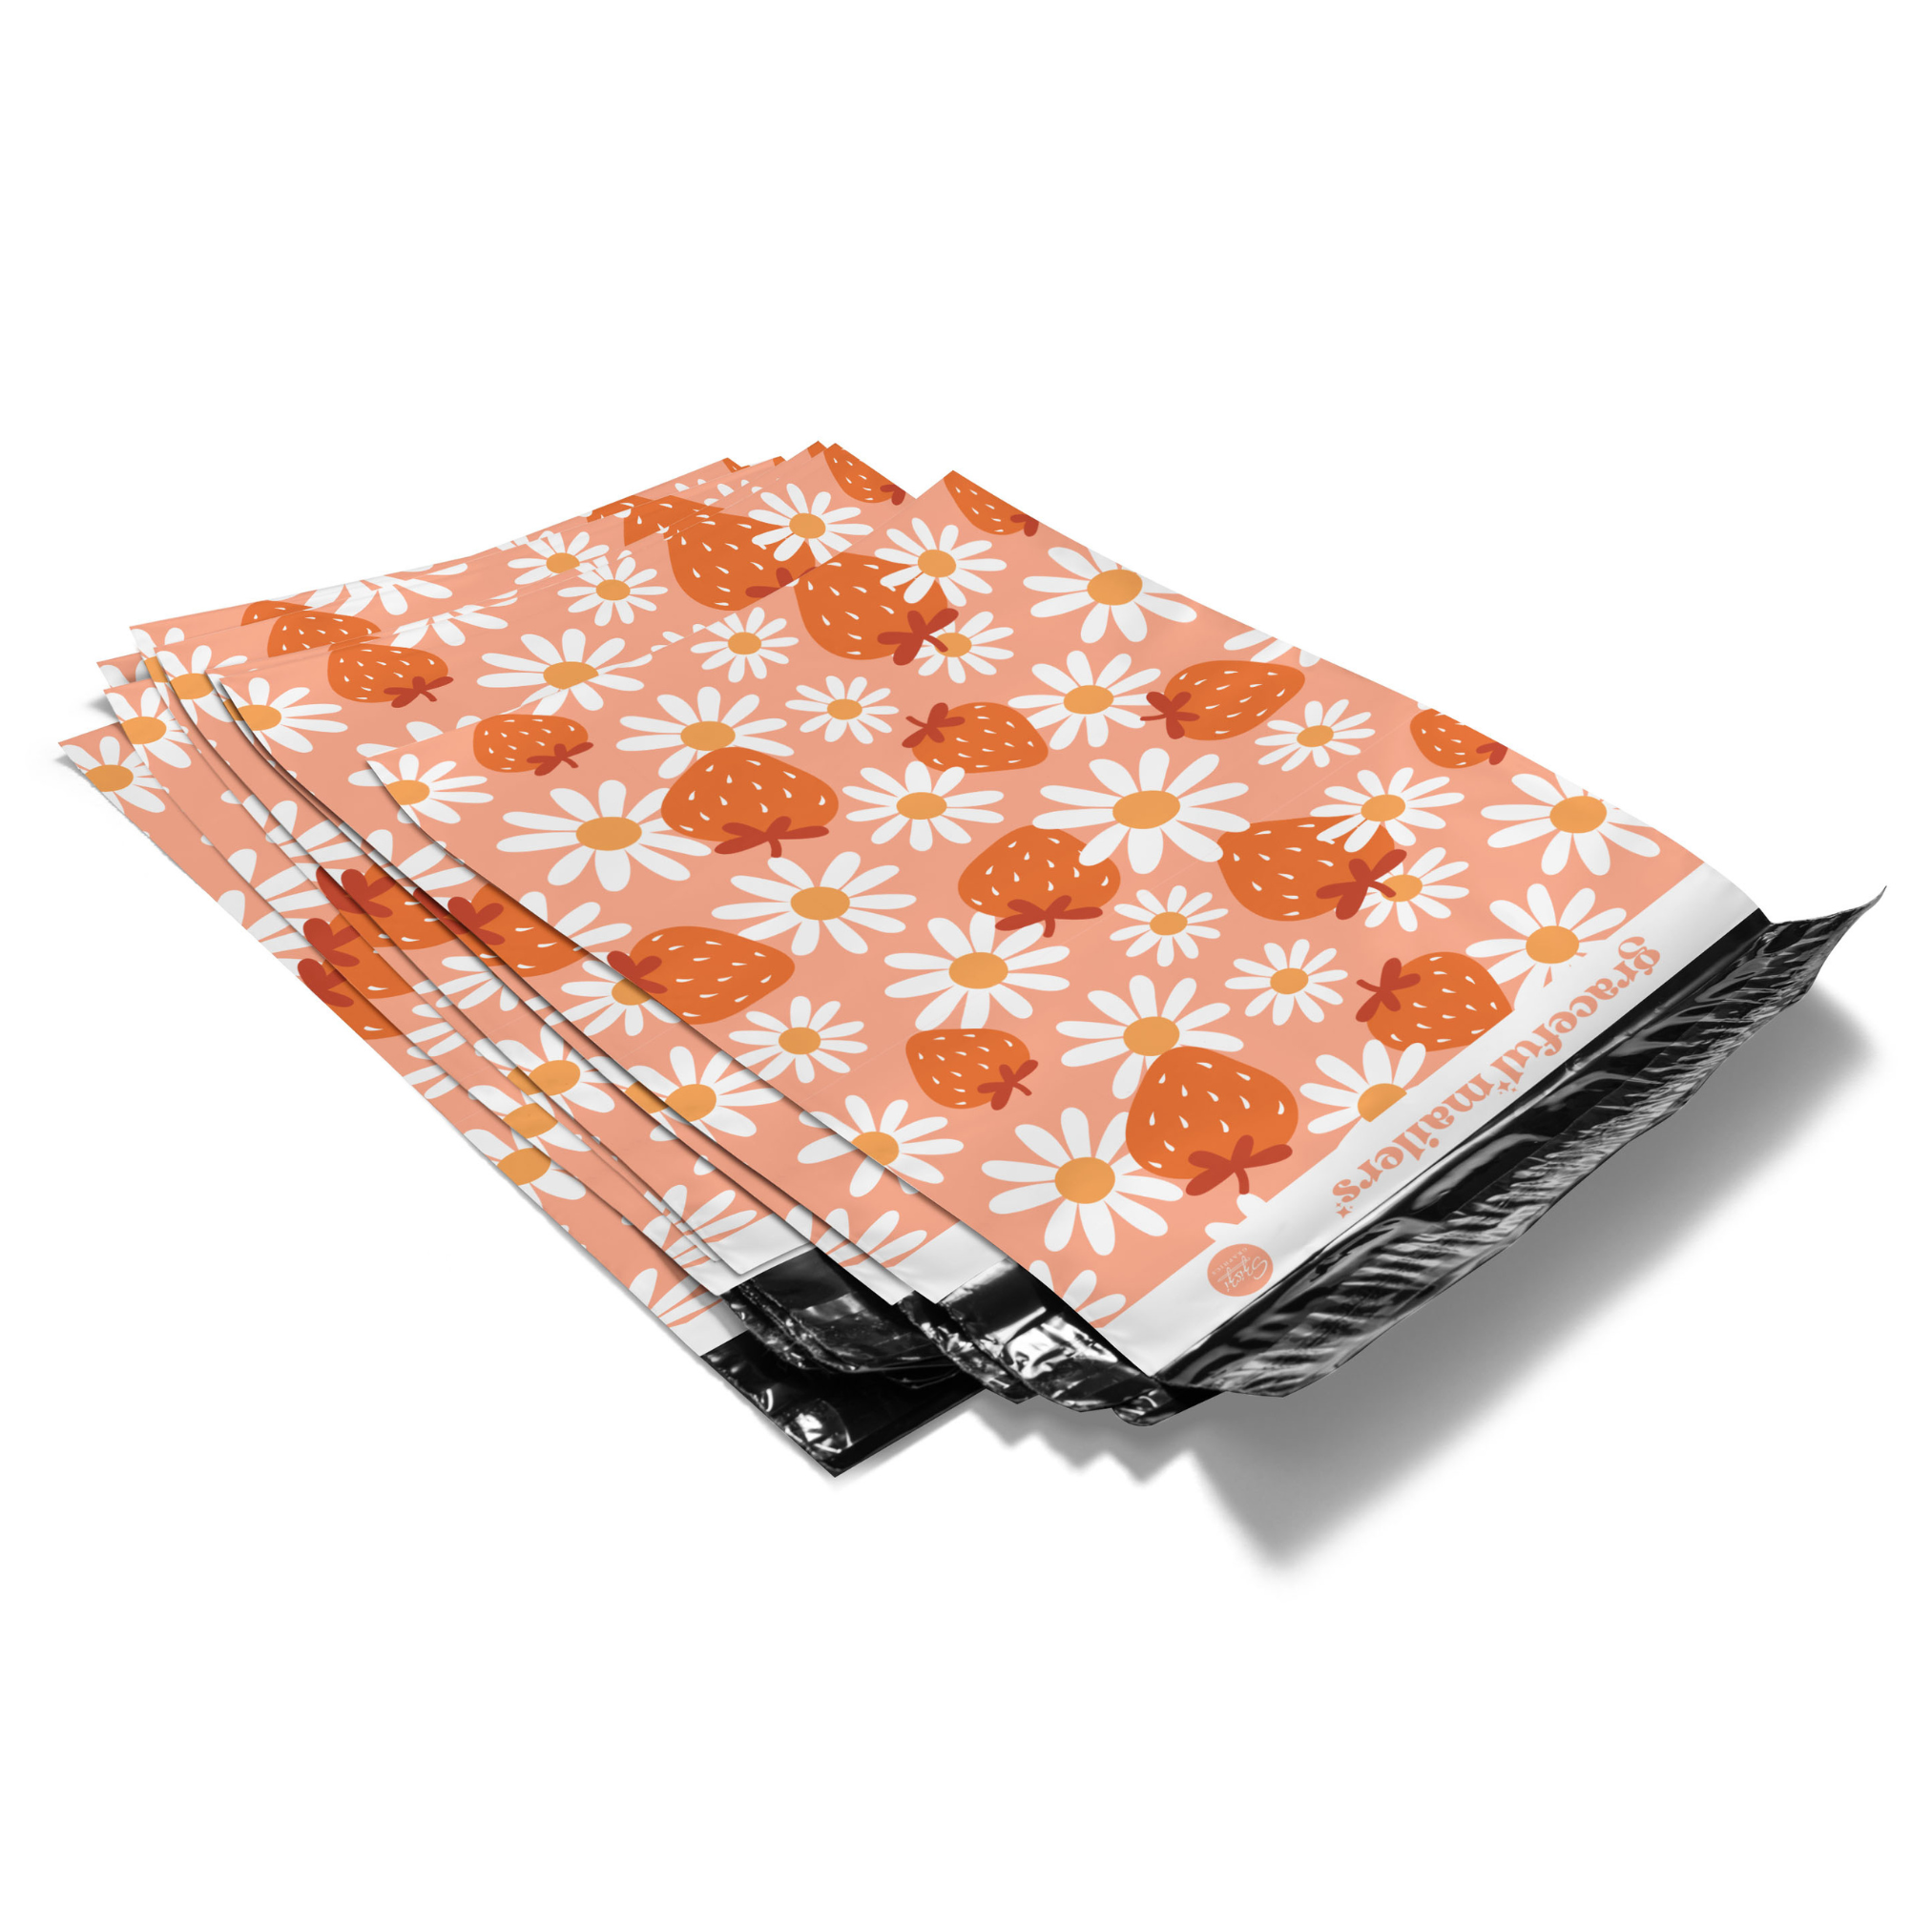 Daisy Berries - 6x9 Poly Mailer